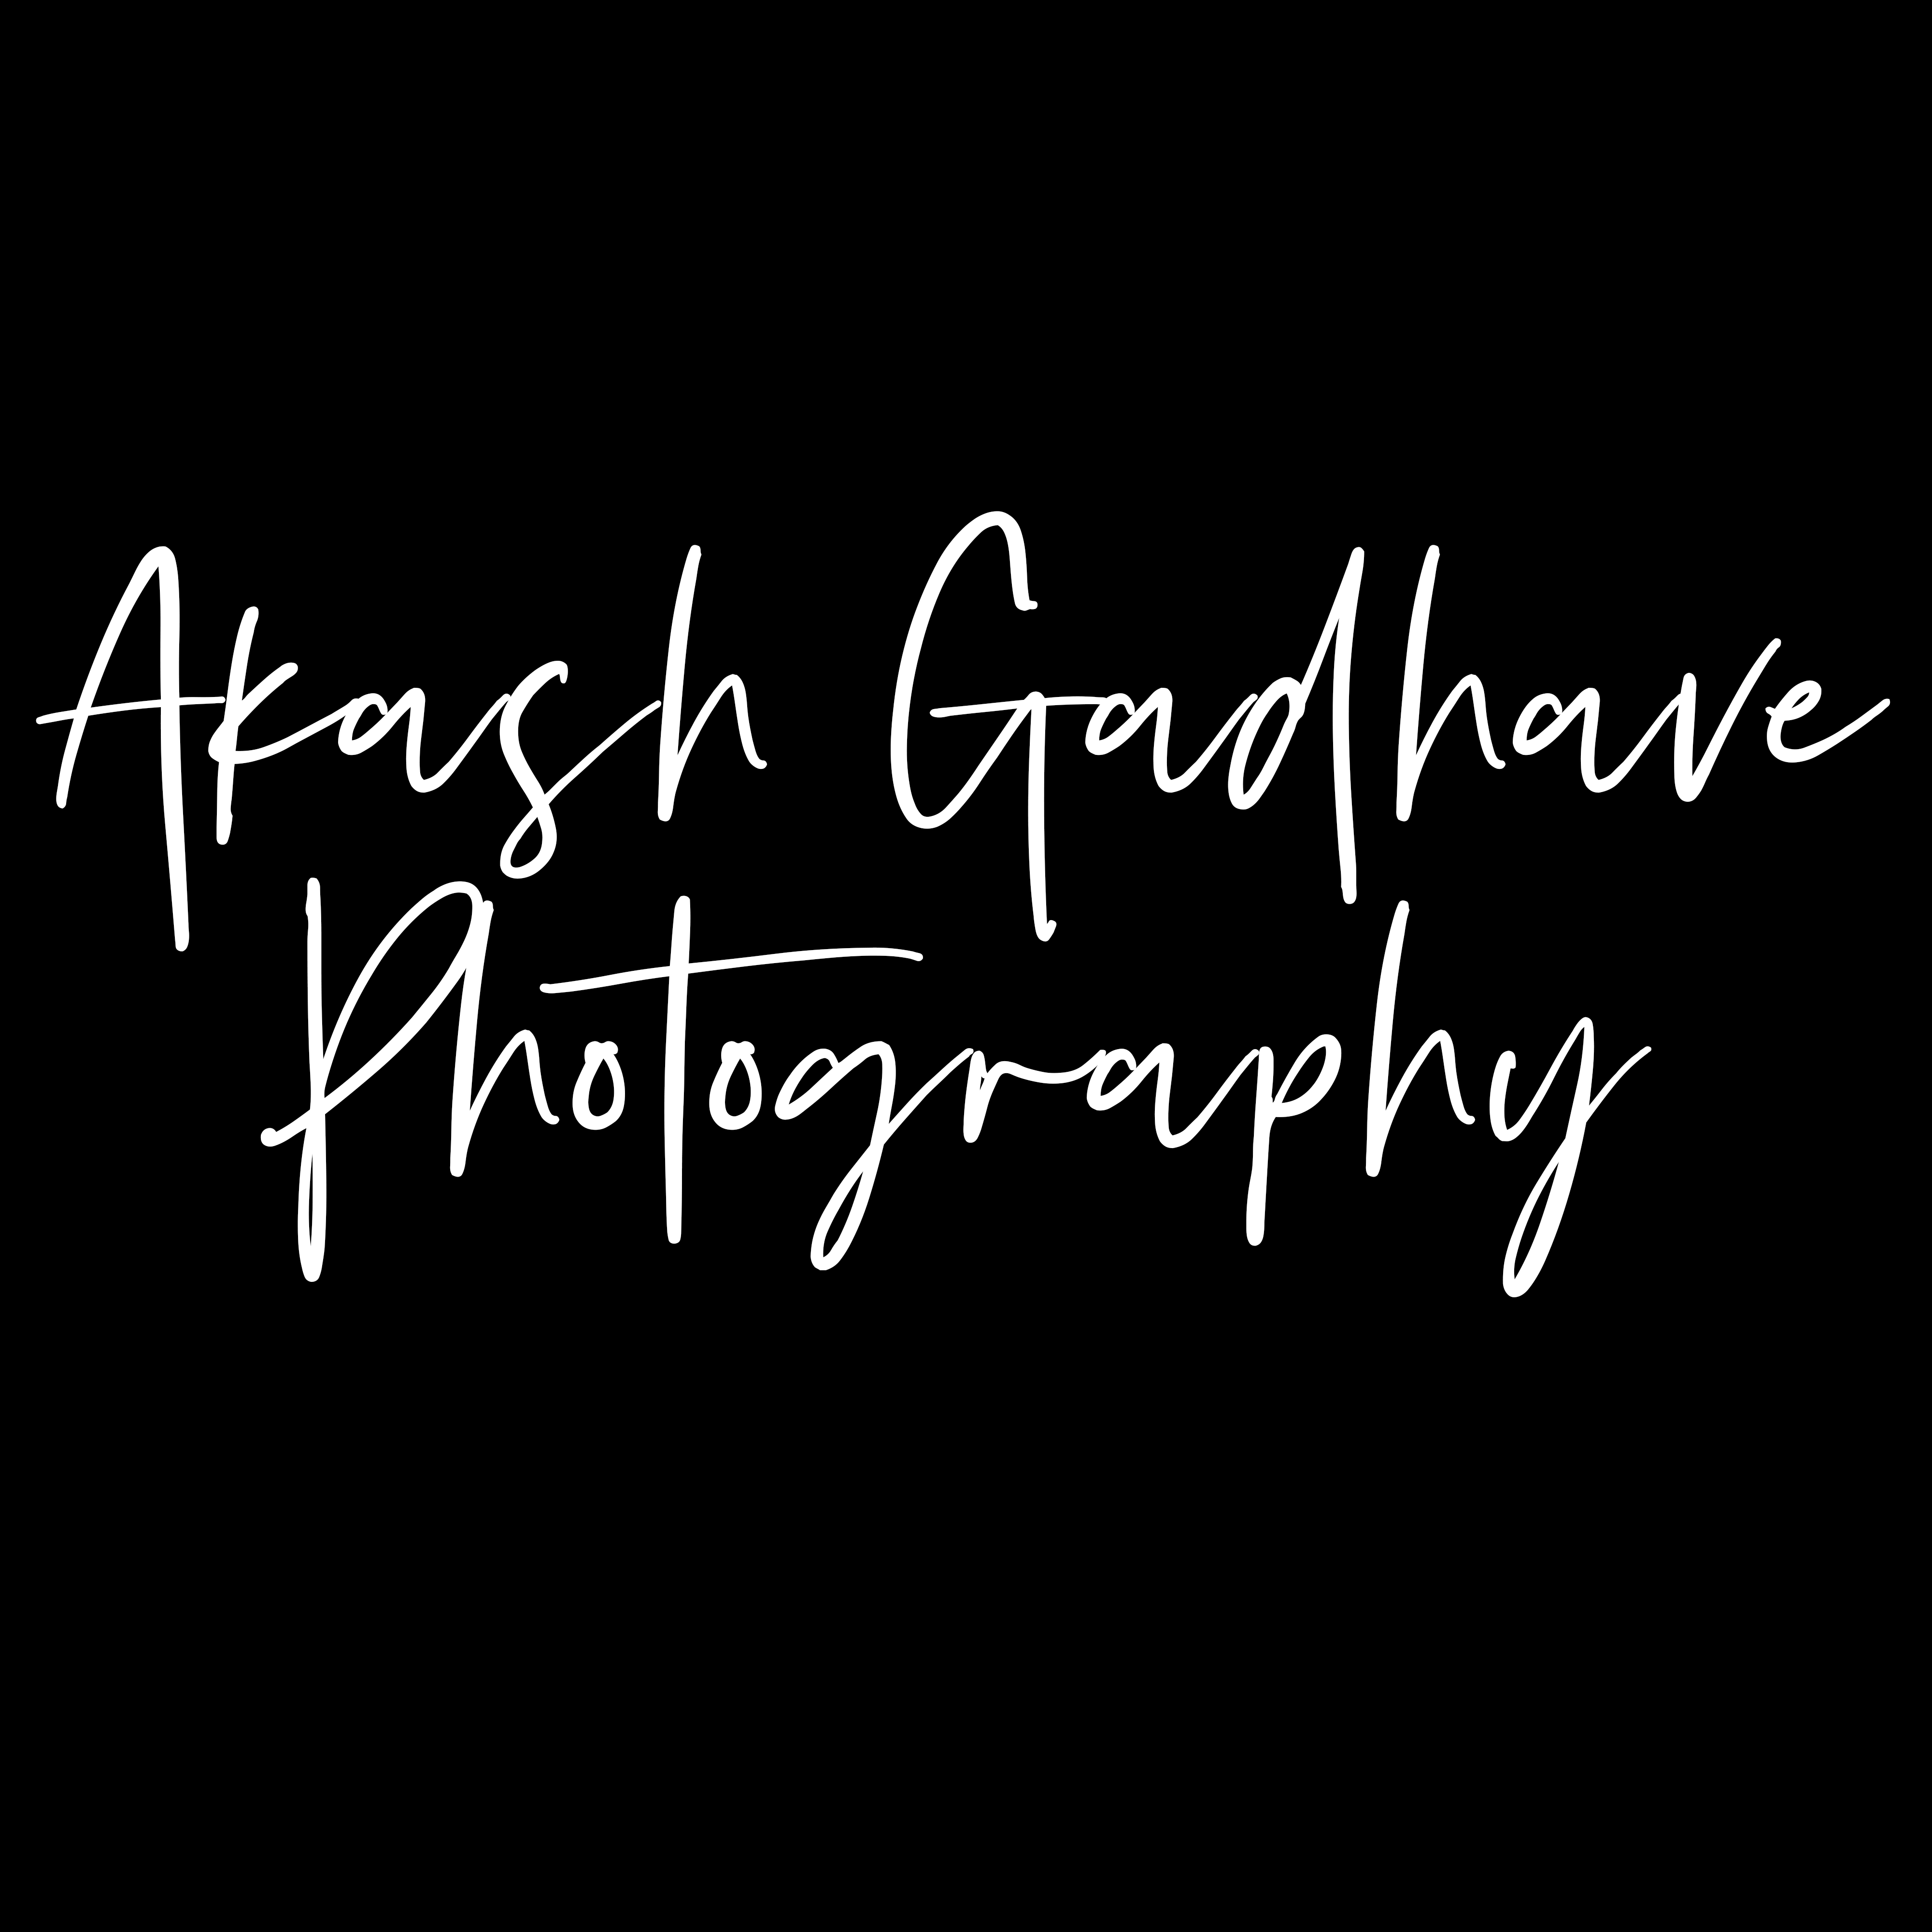 Akash Gadhave Photography|Catering Services|Event Services